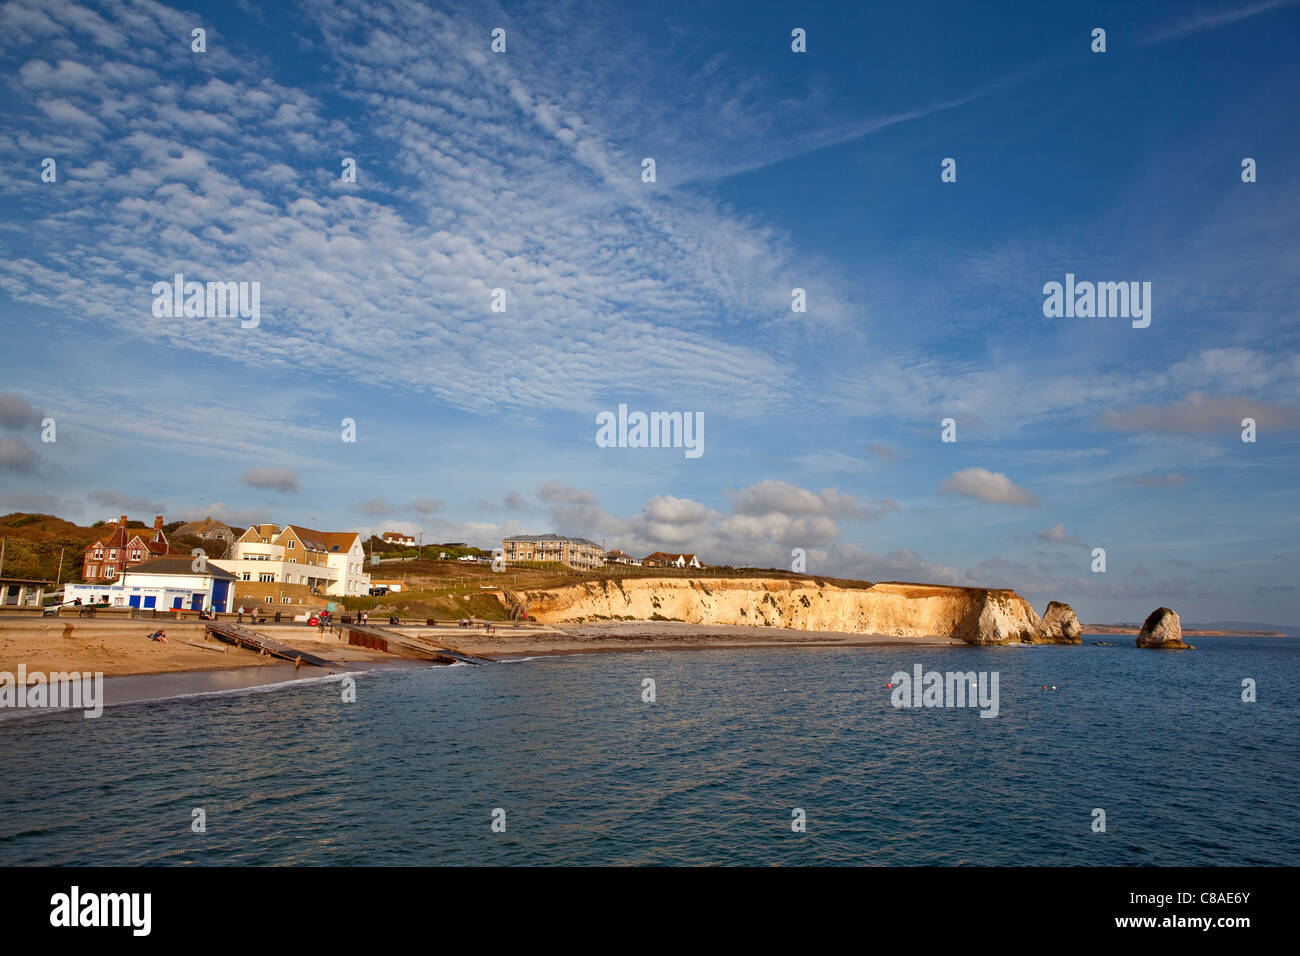 Freshwater bay on the Isle of Wight. Stock Photo